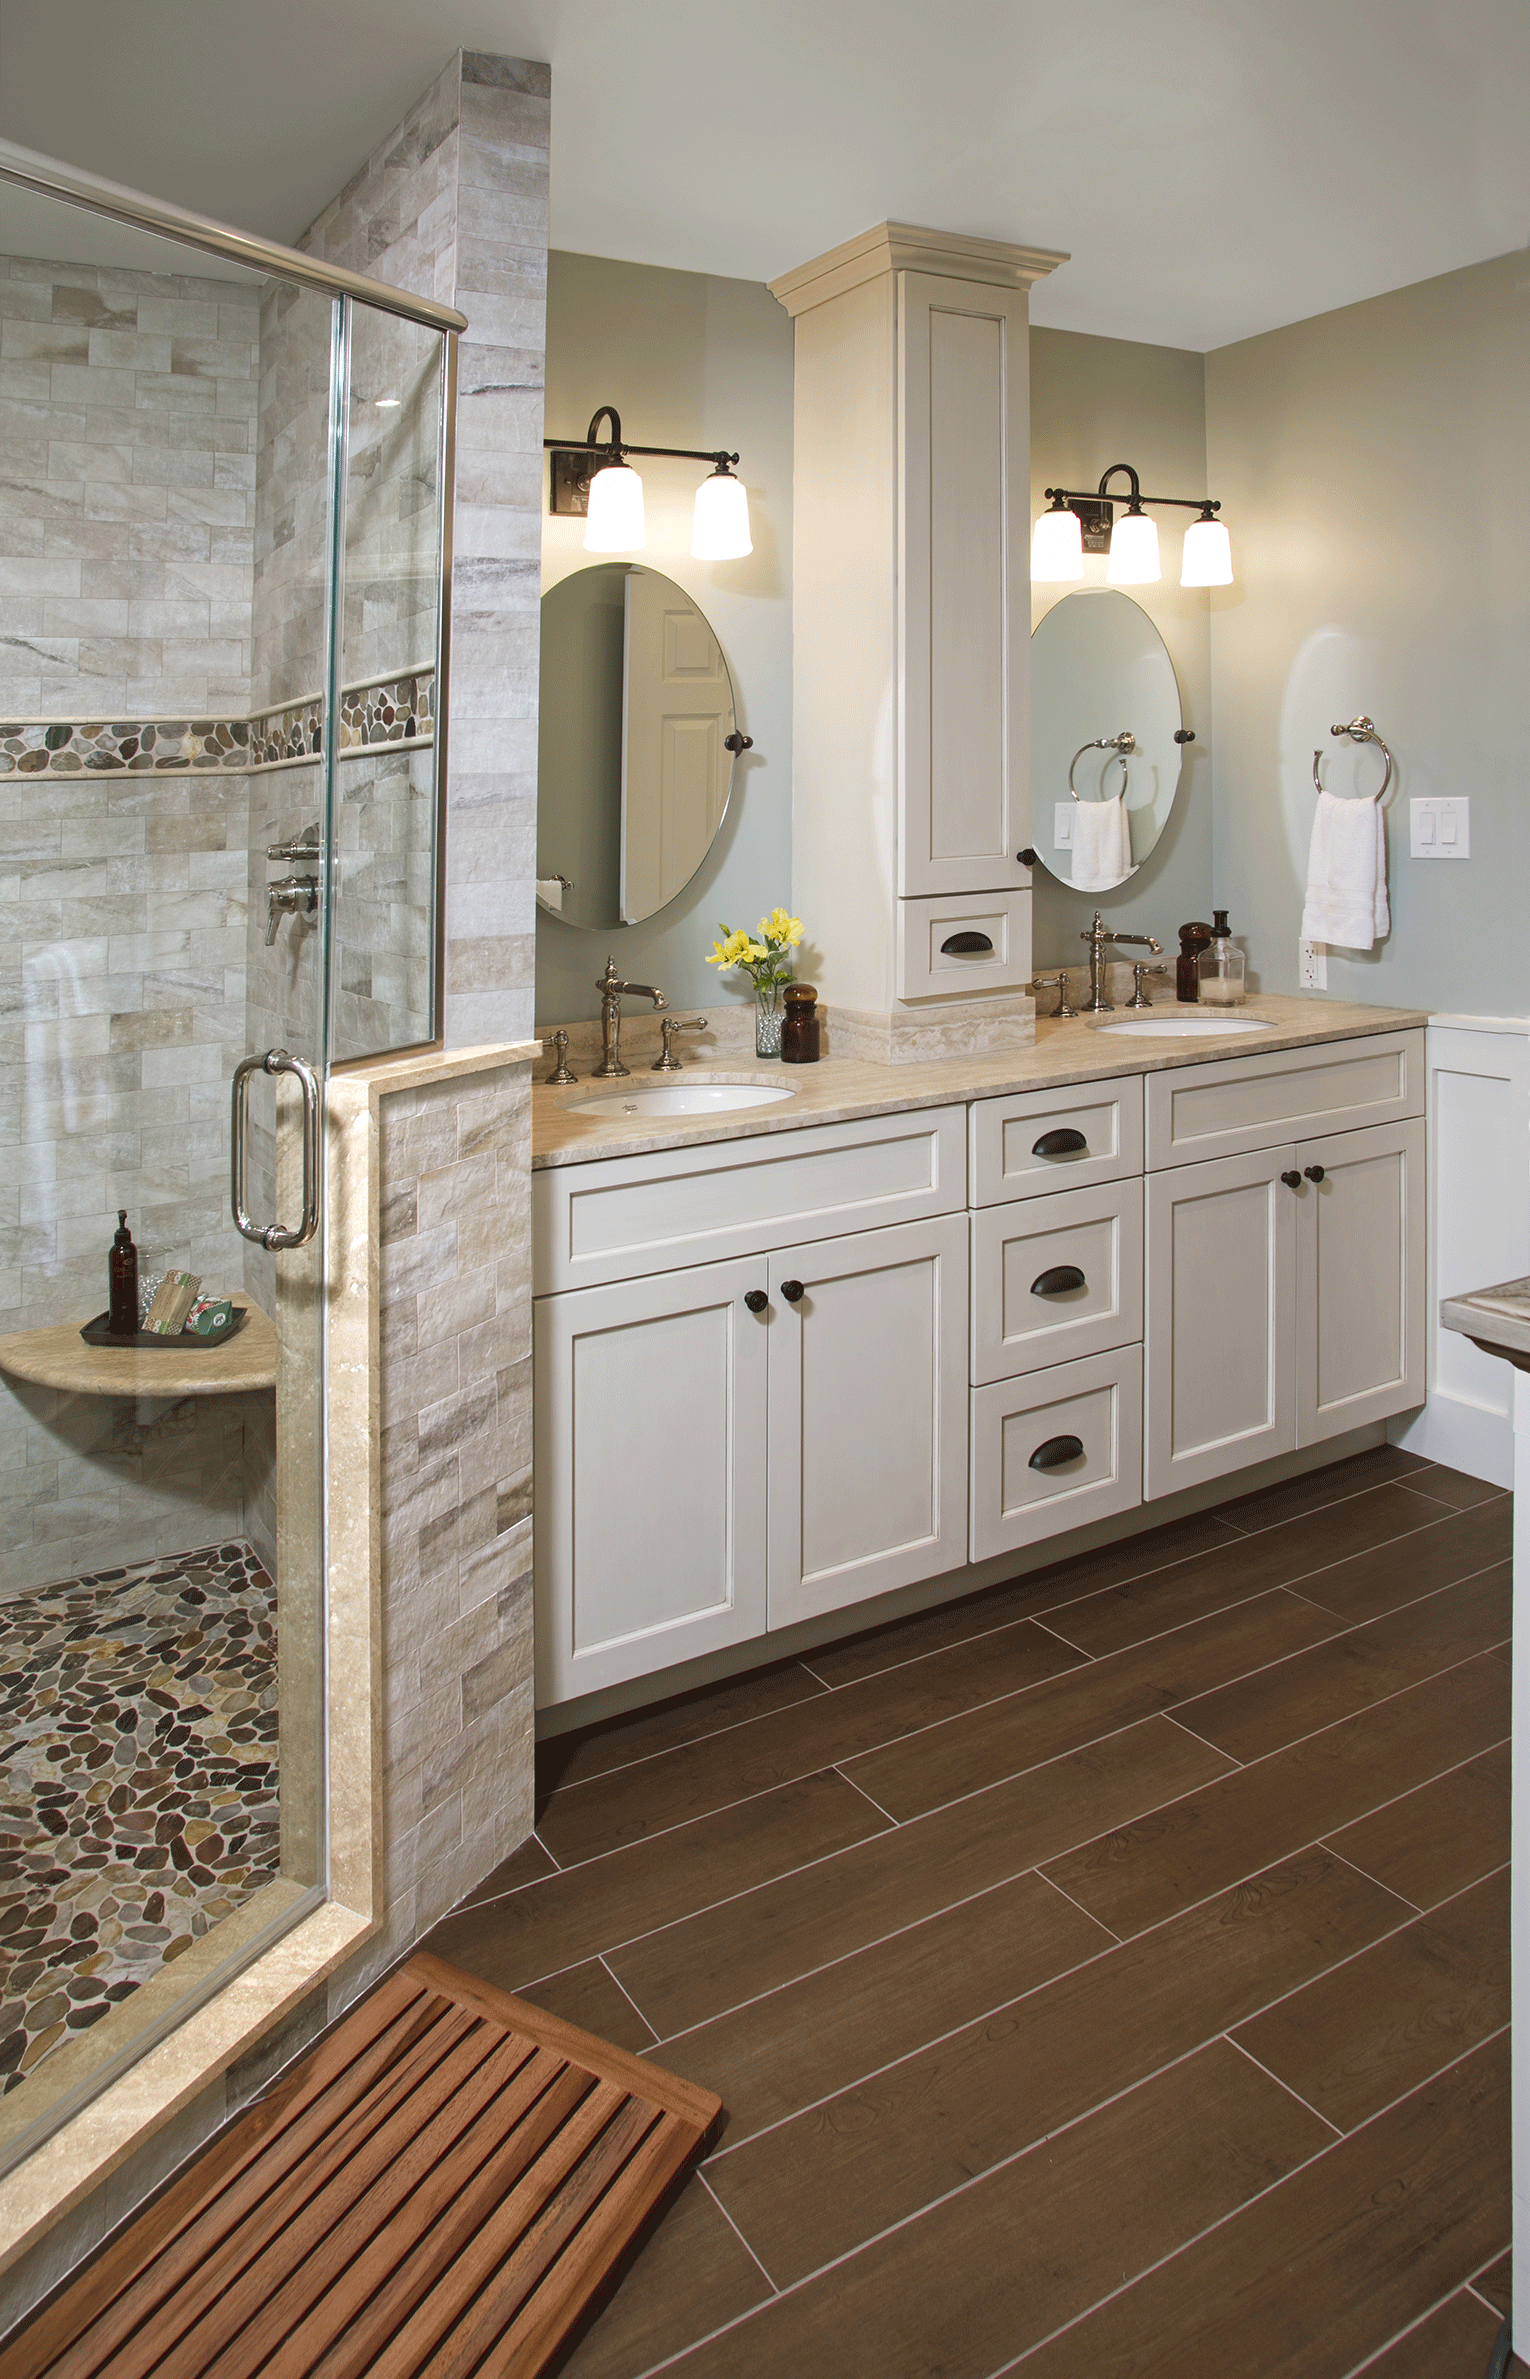  Traditional  Bathrooms  Designs  Remodeling HTRenovations